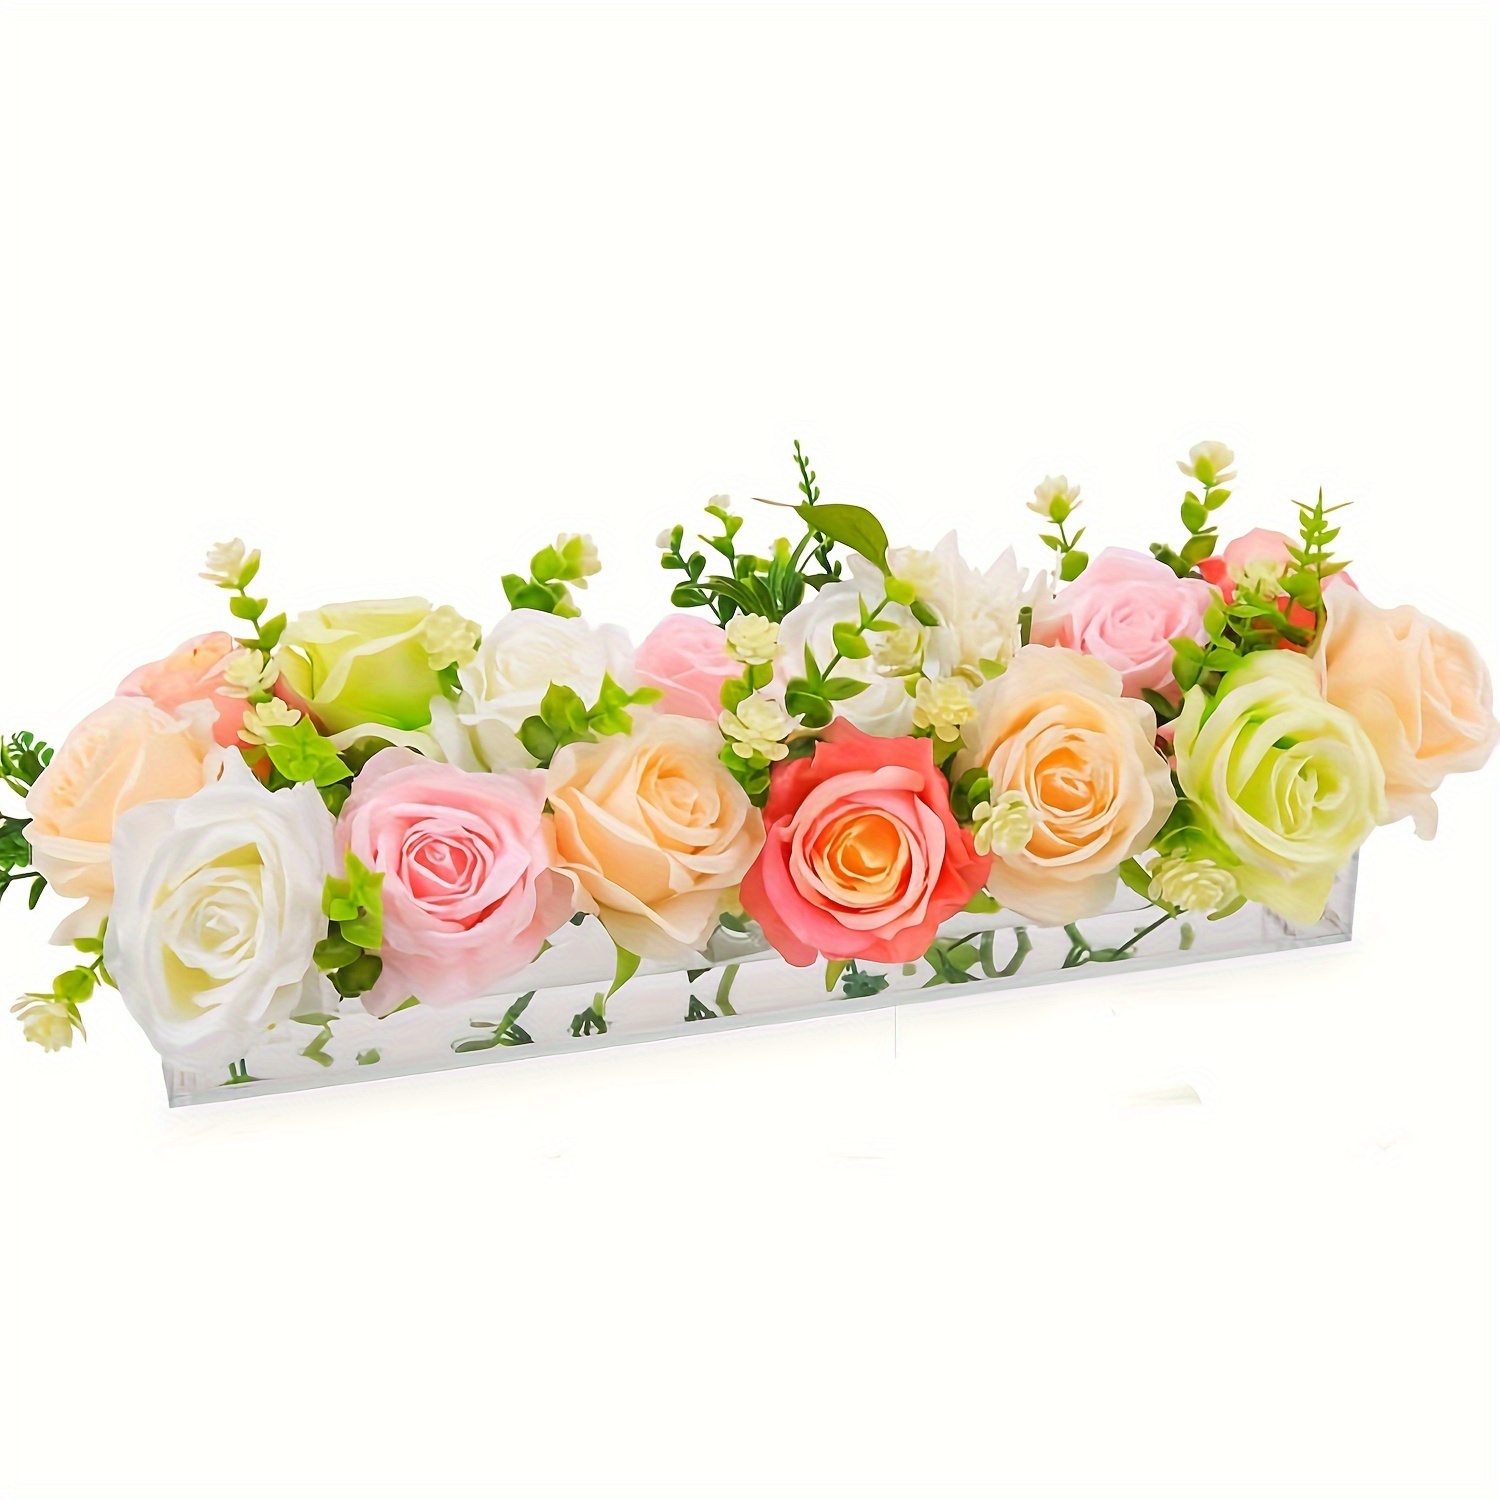 Clear Acrylic Flower Vase Rectangular Floral Centerpiece for Dining Table 16 inch Long Rectangle Decorative Modern Vase - Low Floral Vases for